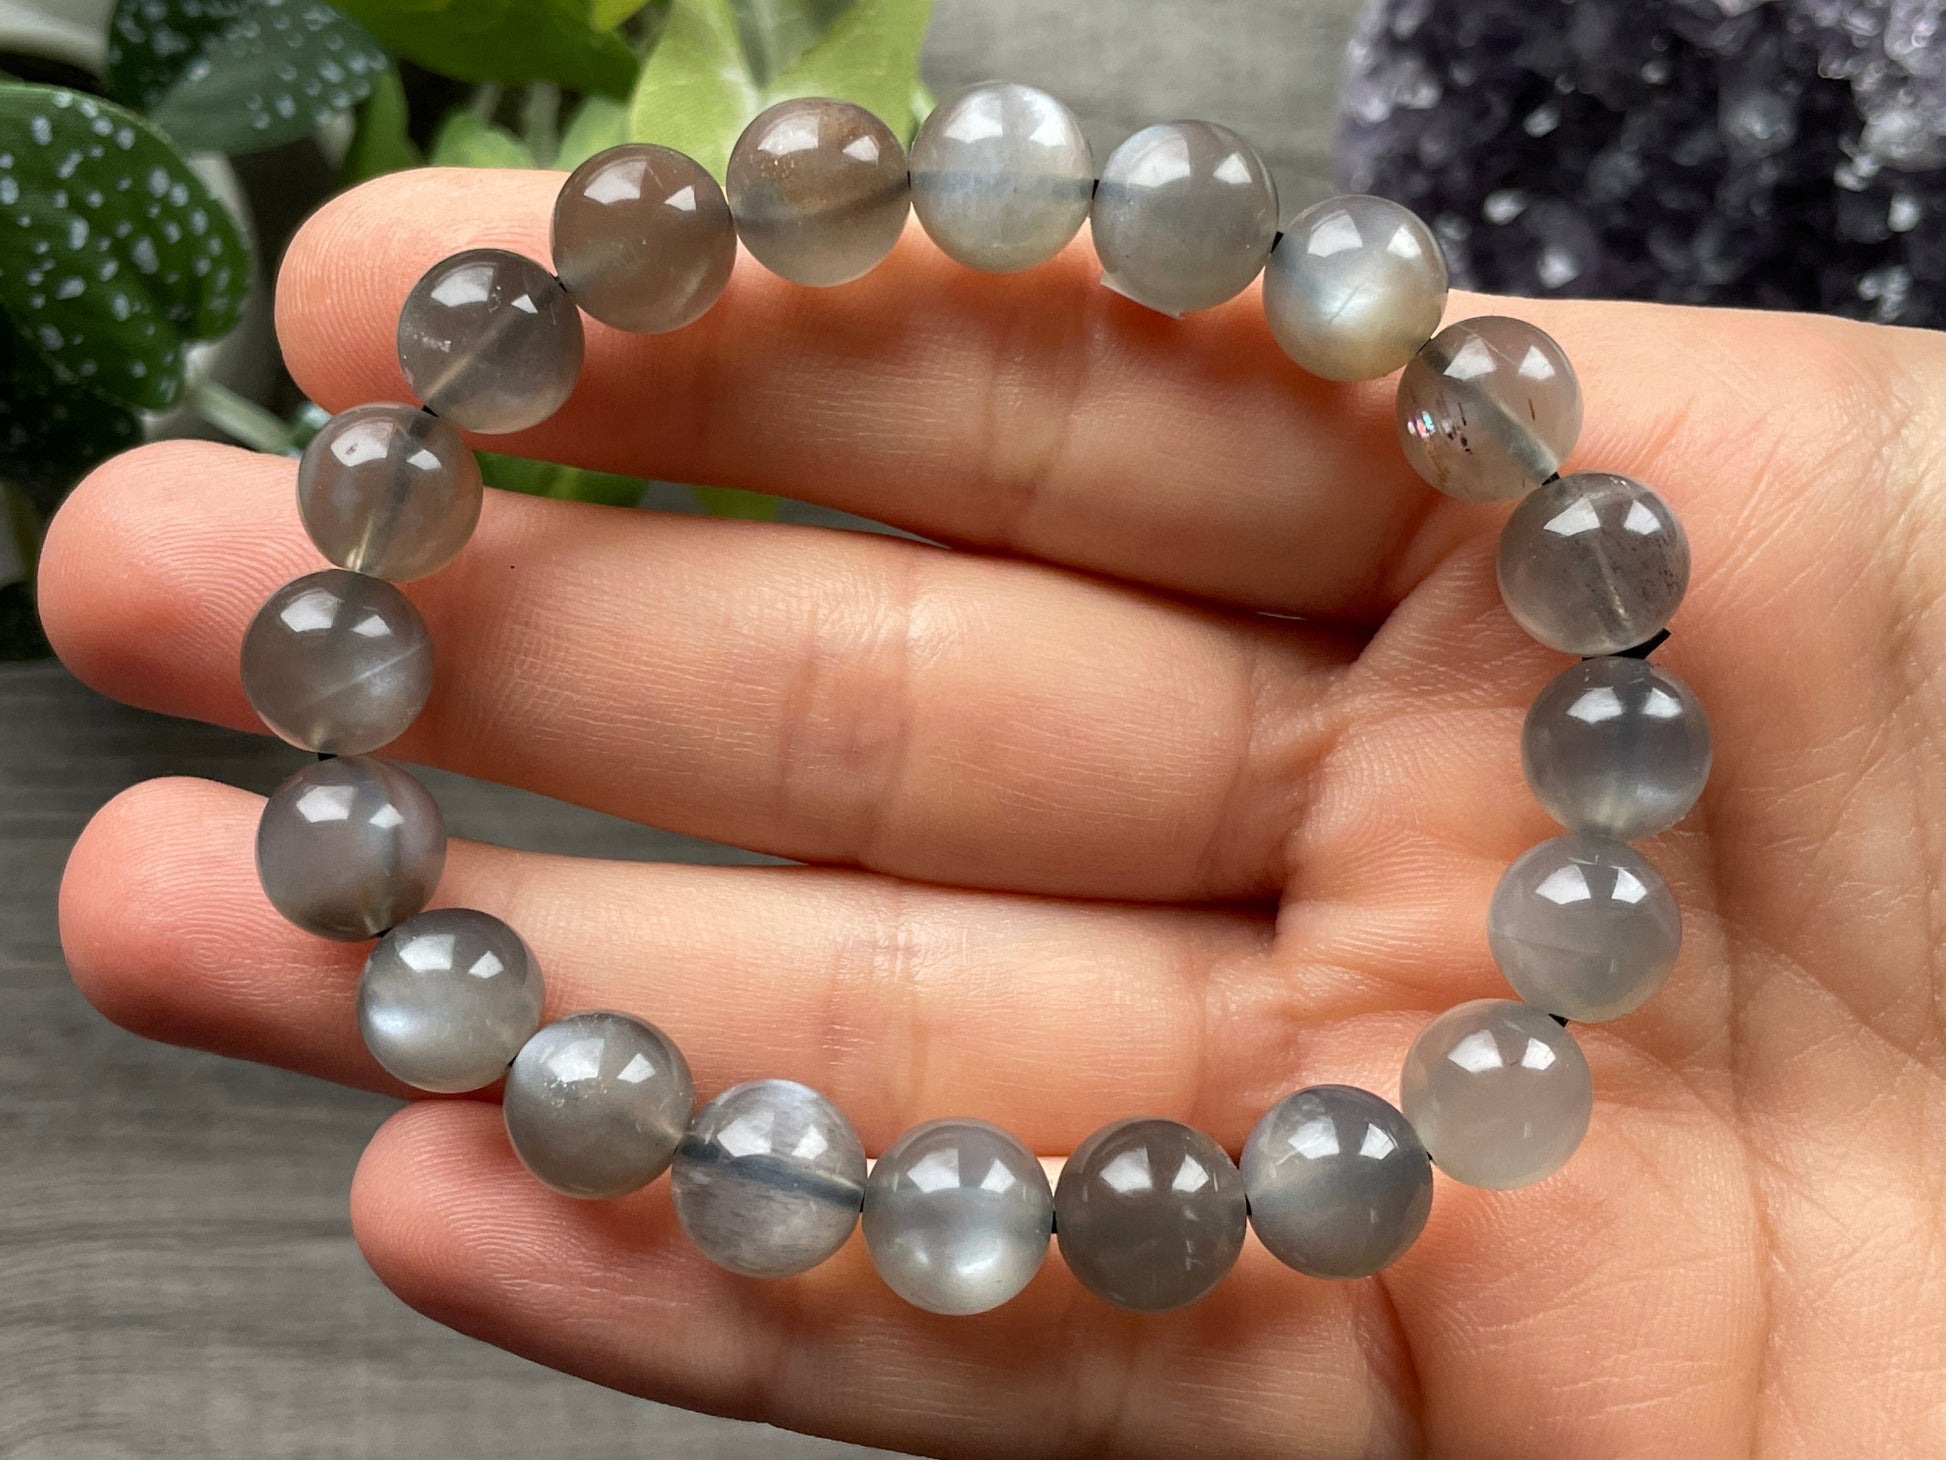 Pictured is a grey moonstone bead bracelet.